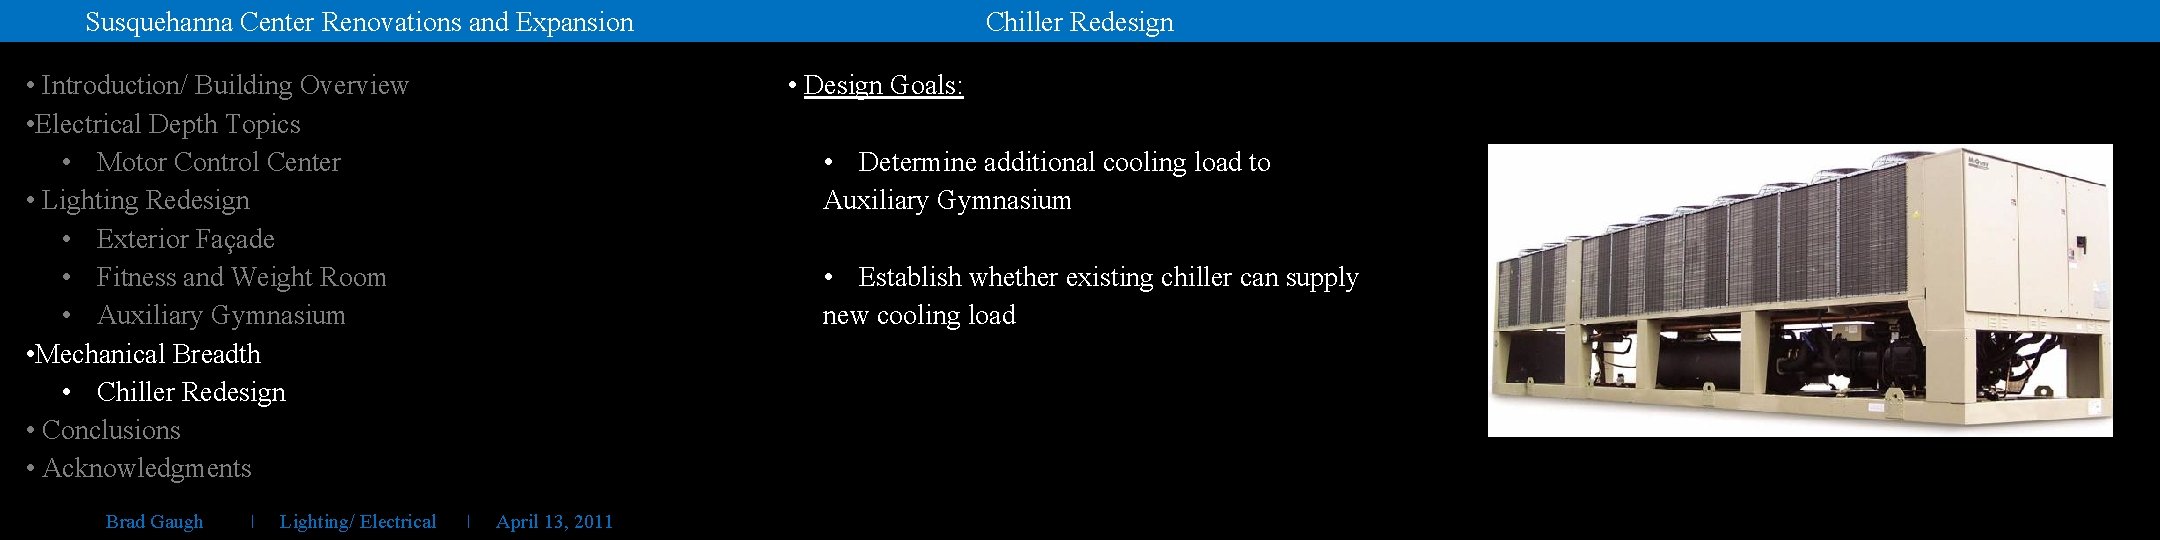 Chiller Redesign Susquehanna Center Renovations and Expansion • Introduction/ Building Overview • Electrical Depth